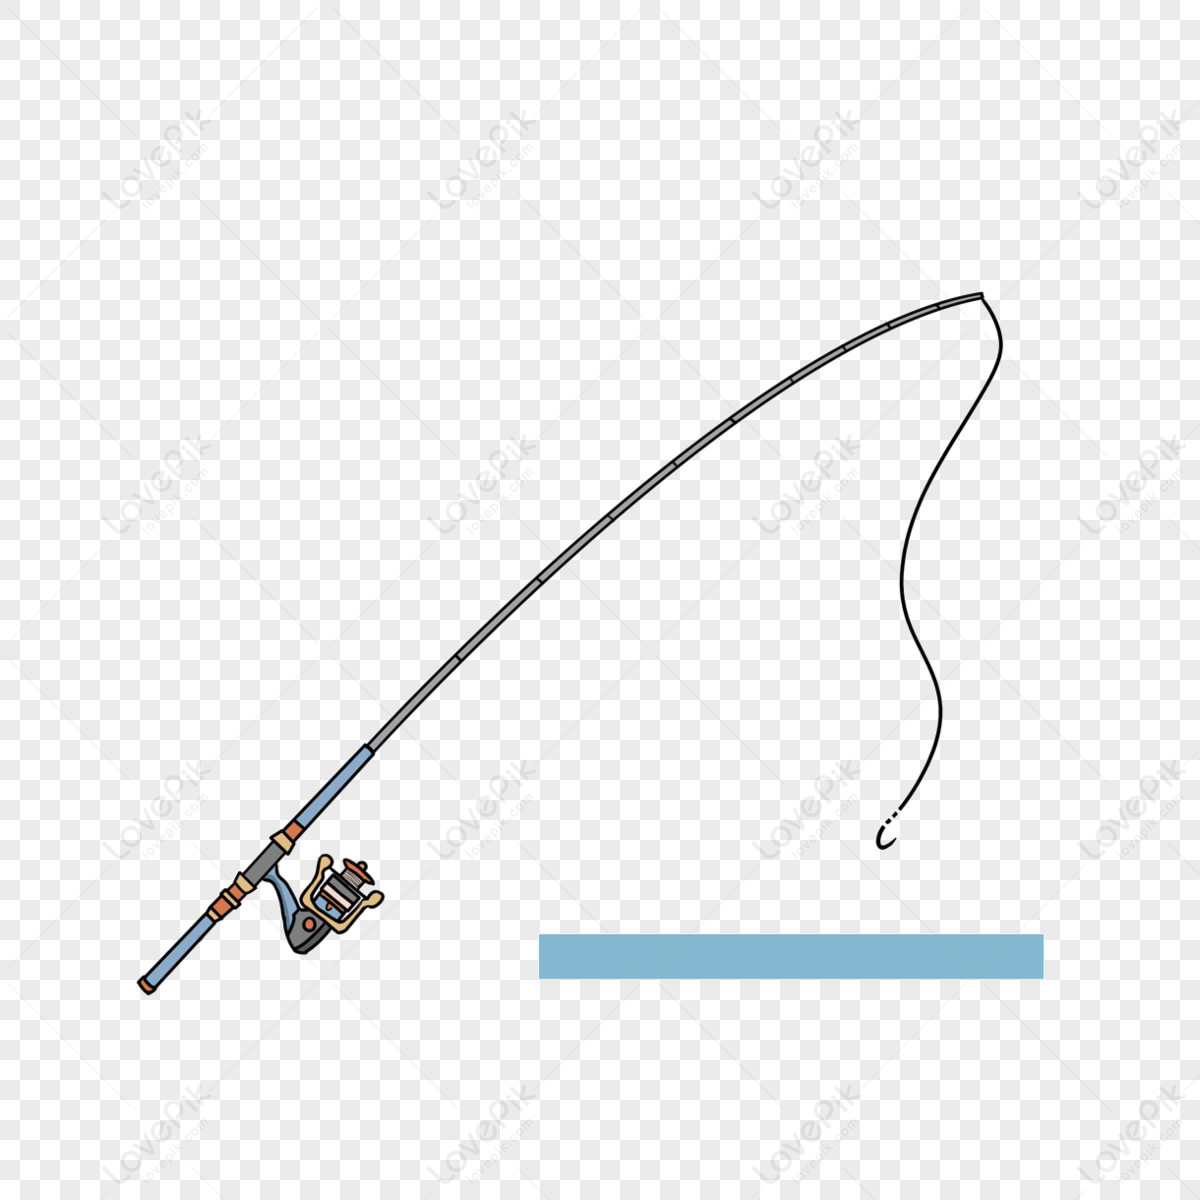 Fishing Rods PNG Images With Transparent Background